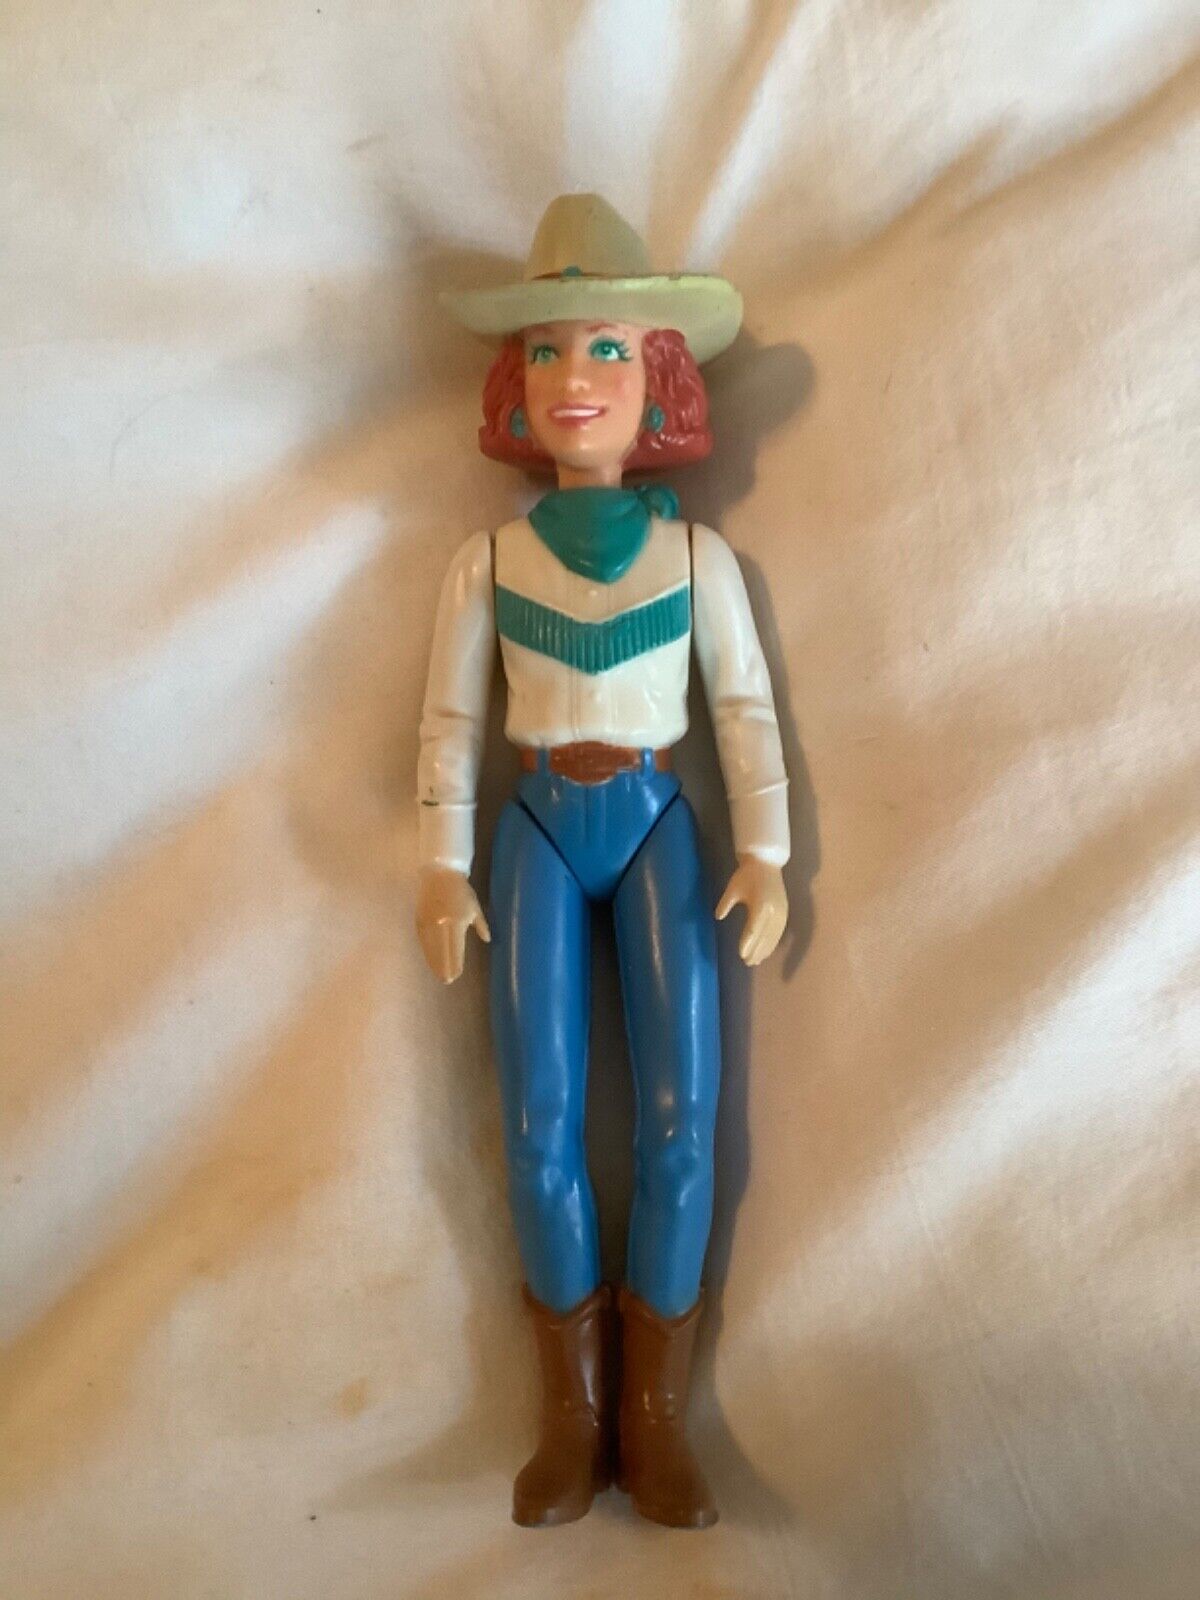 1995 Play People Playskool Cowgirl Figure Western Stable Woman Posable Toy #0018